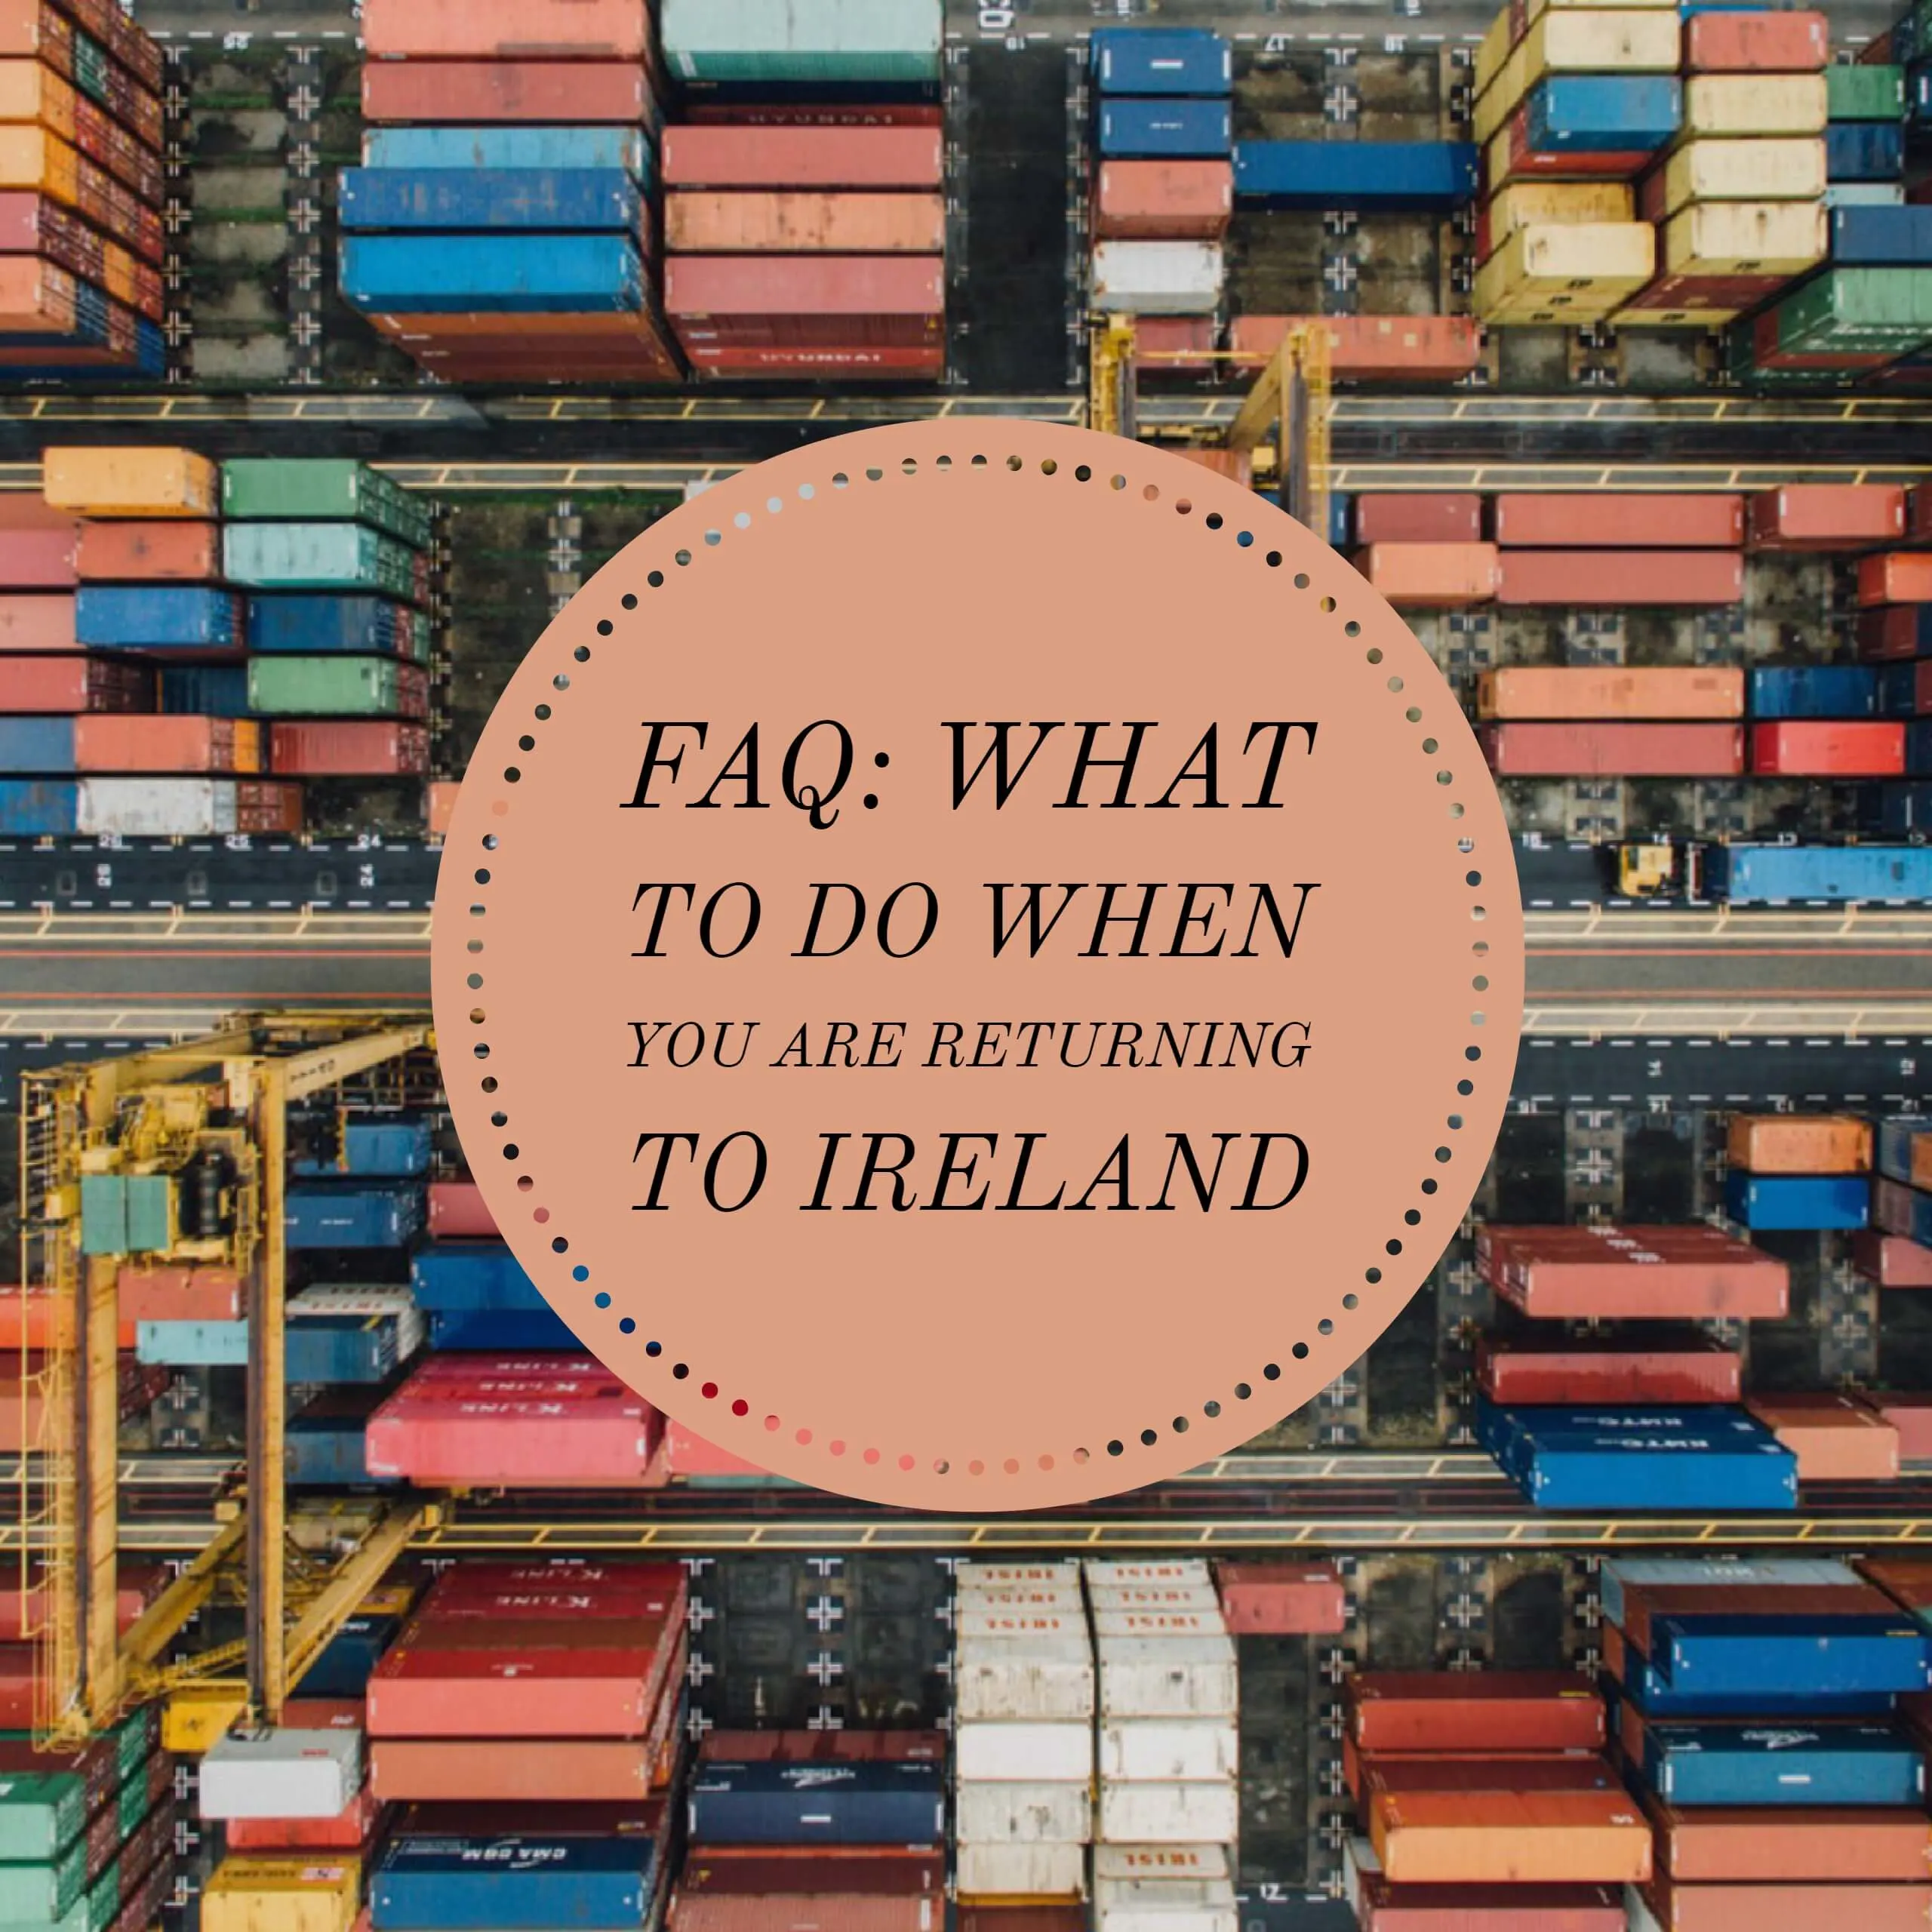 Faq on what to do when returning to Ireland